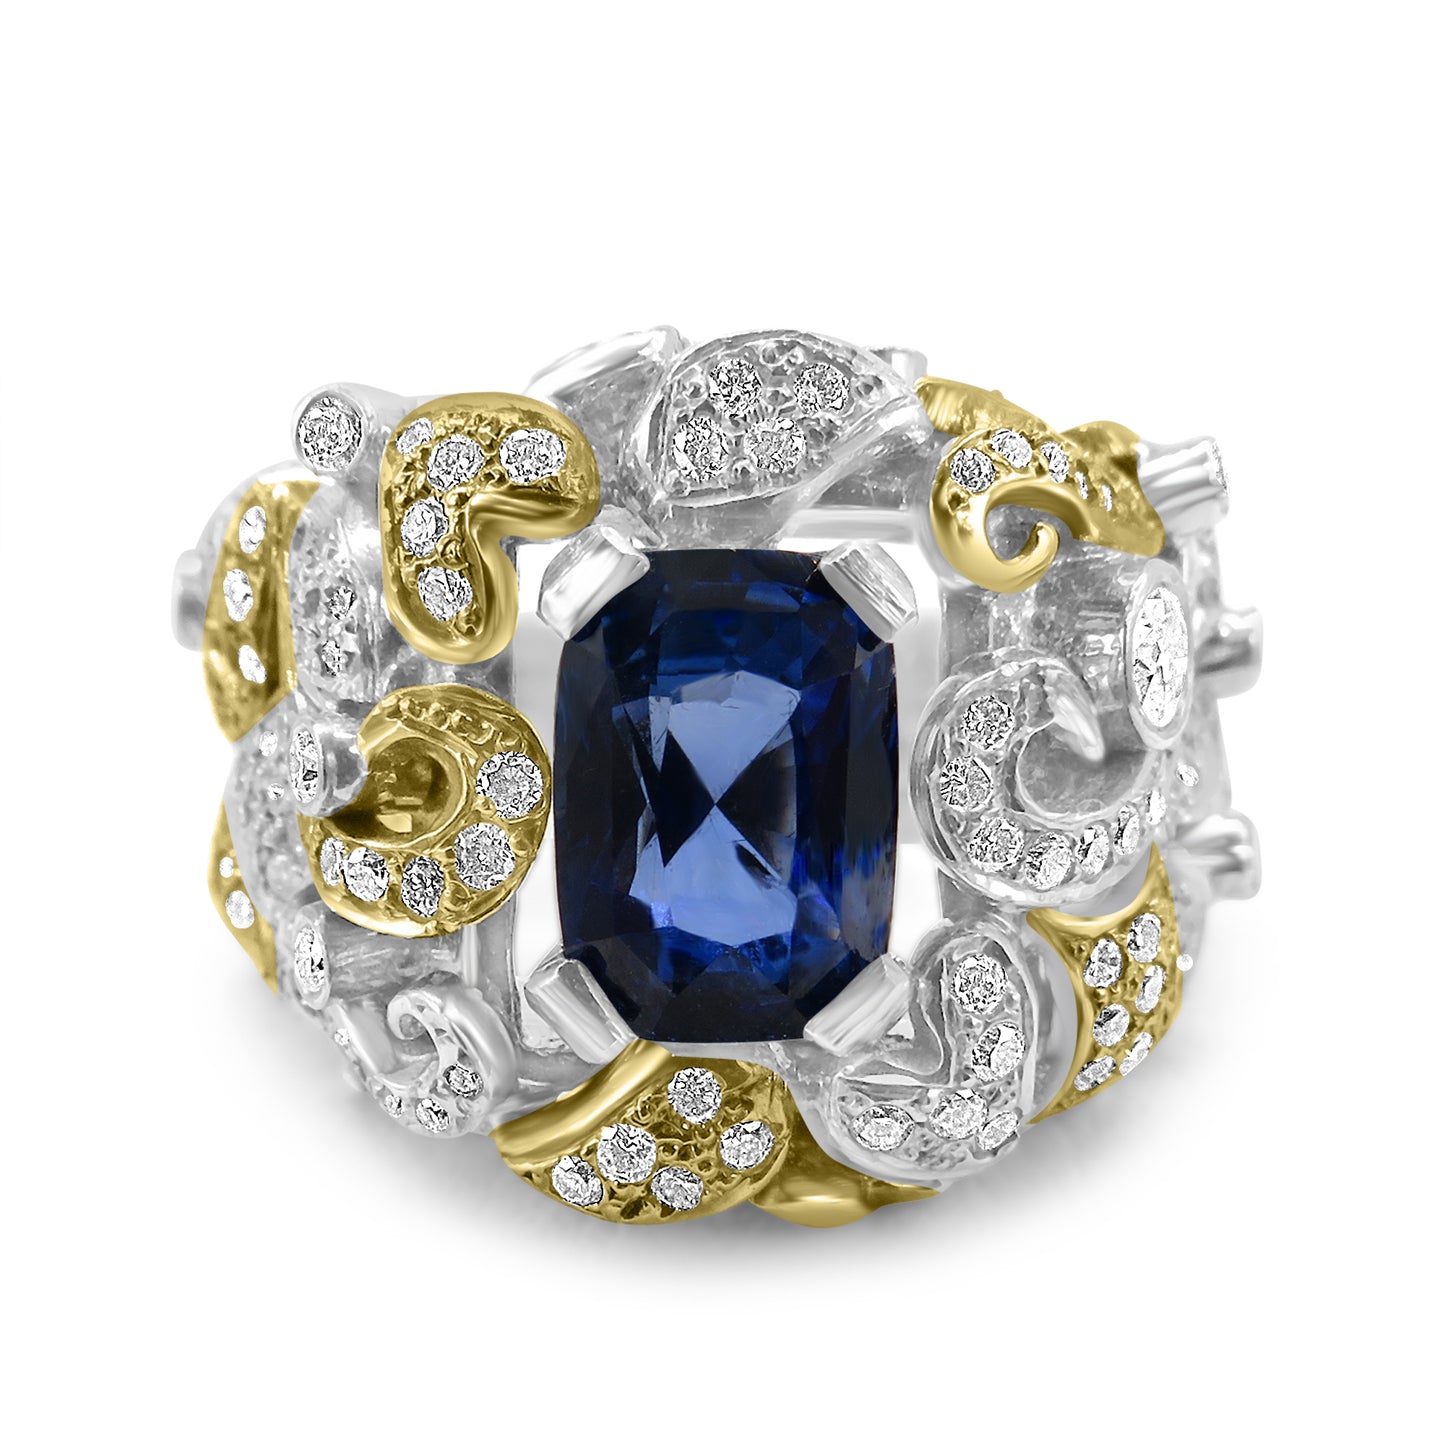 Exceptional Sapphire and Diamond Ring